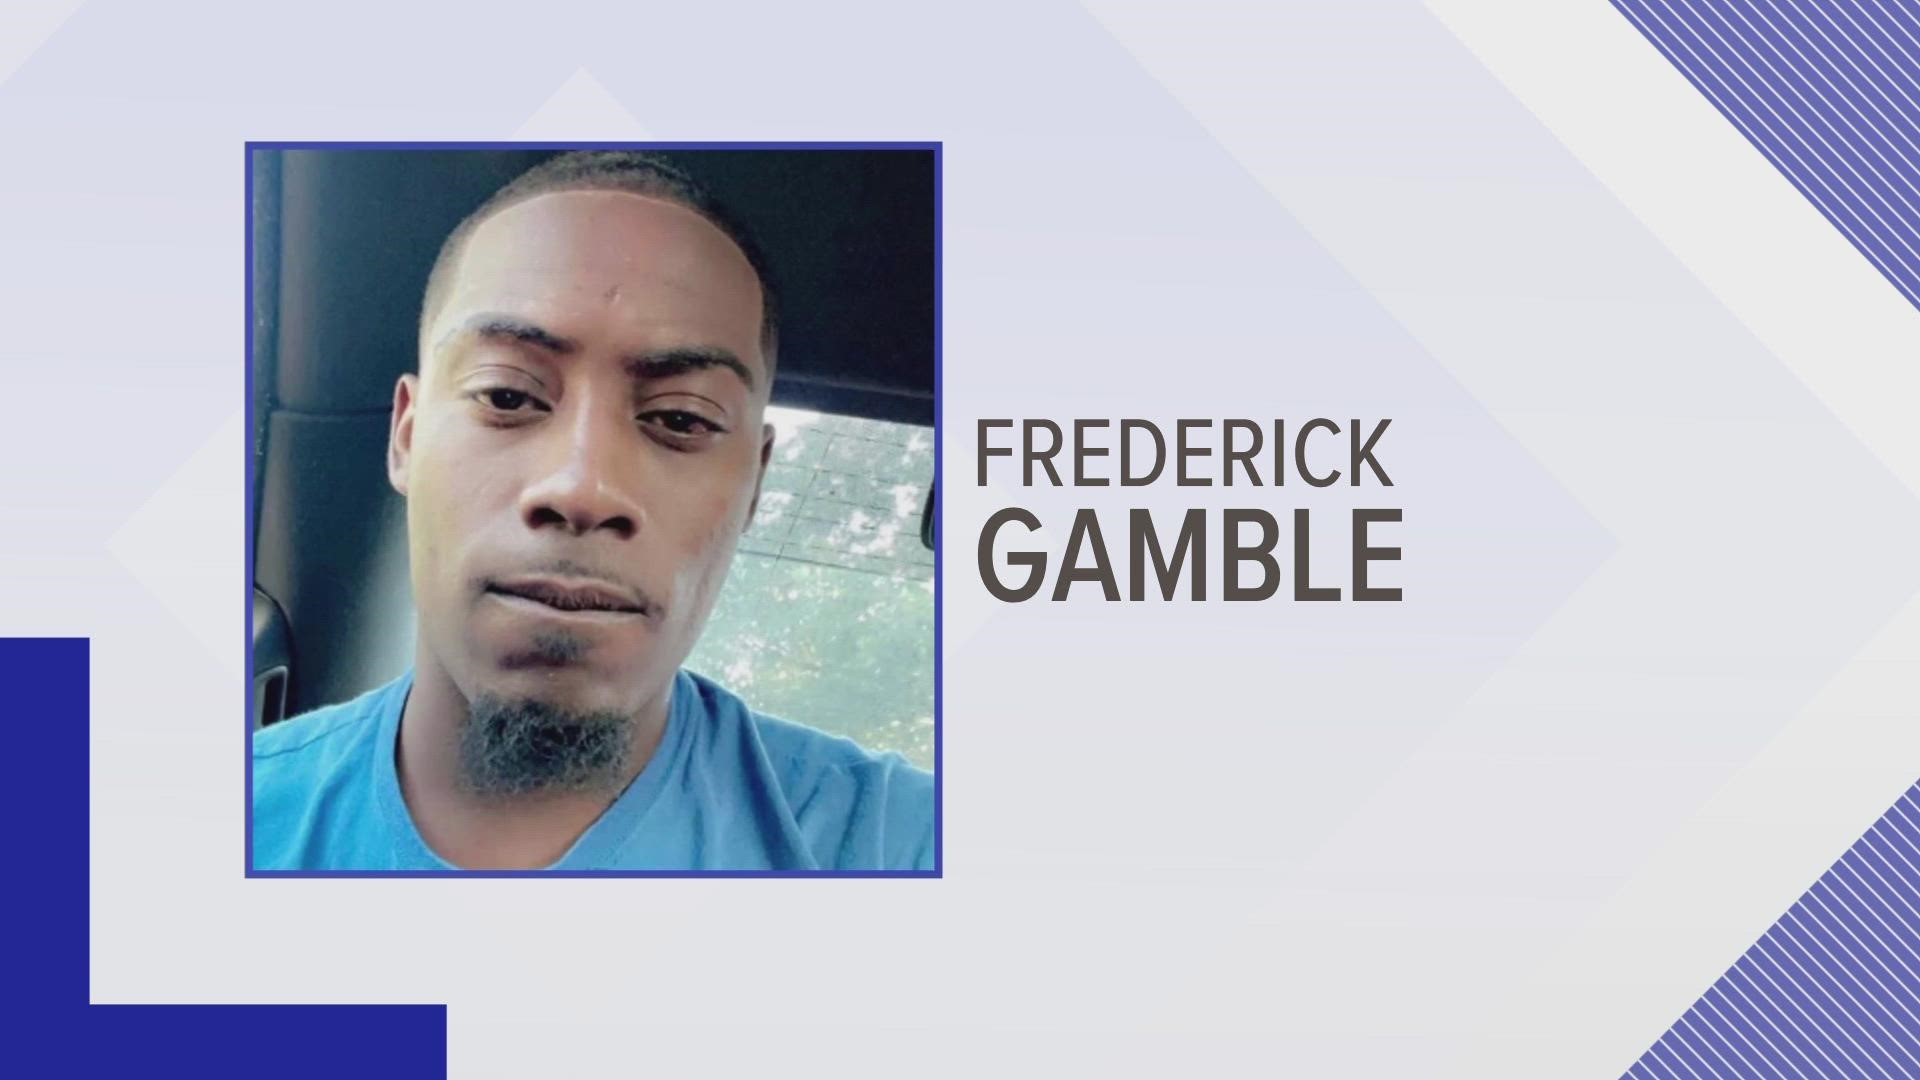 Helena-West Helena, Arkansas, police said Frederick Gamble was charged with filing a false report, among others, after faking his own kidnapping.